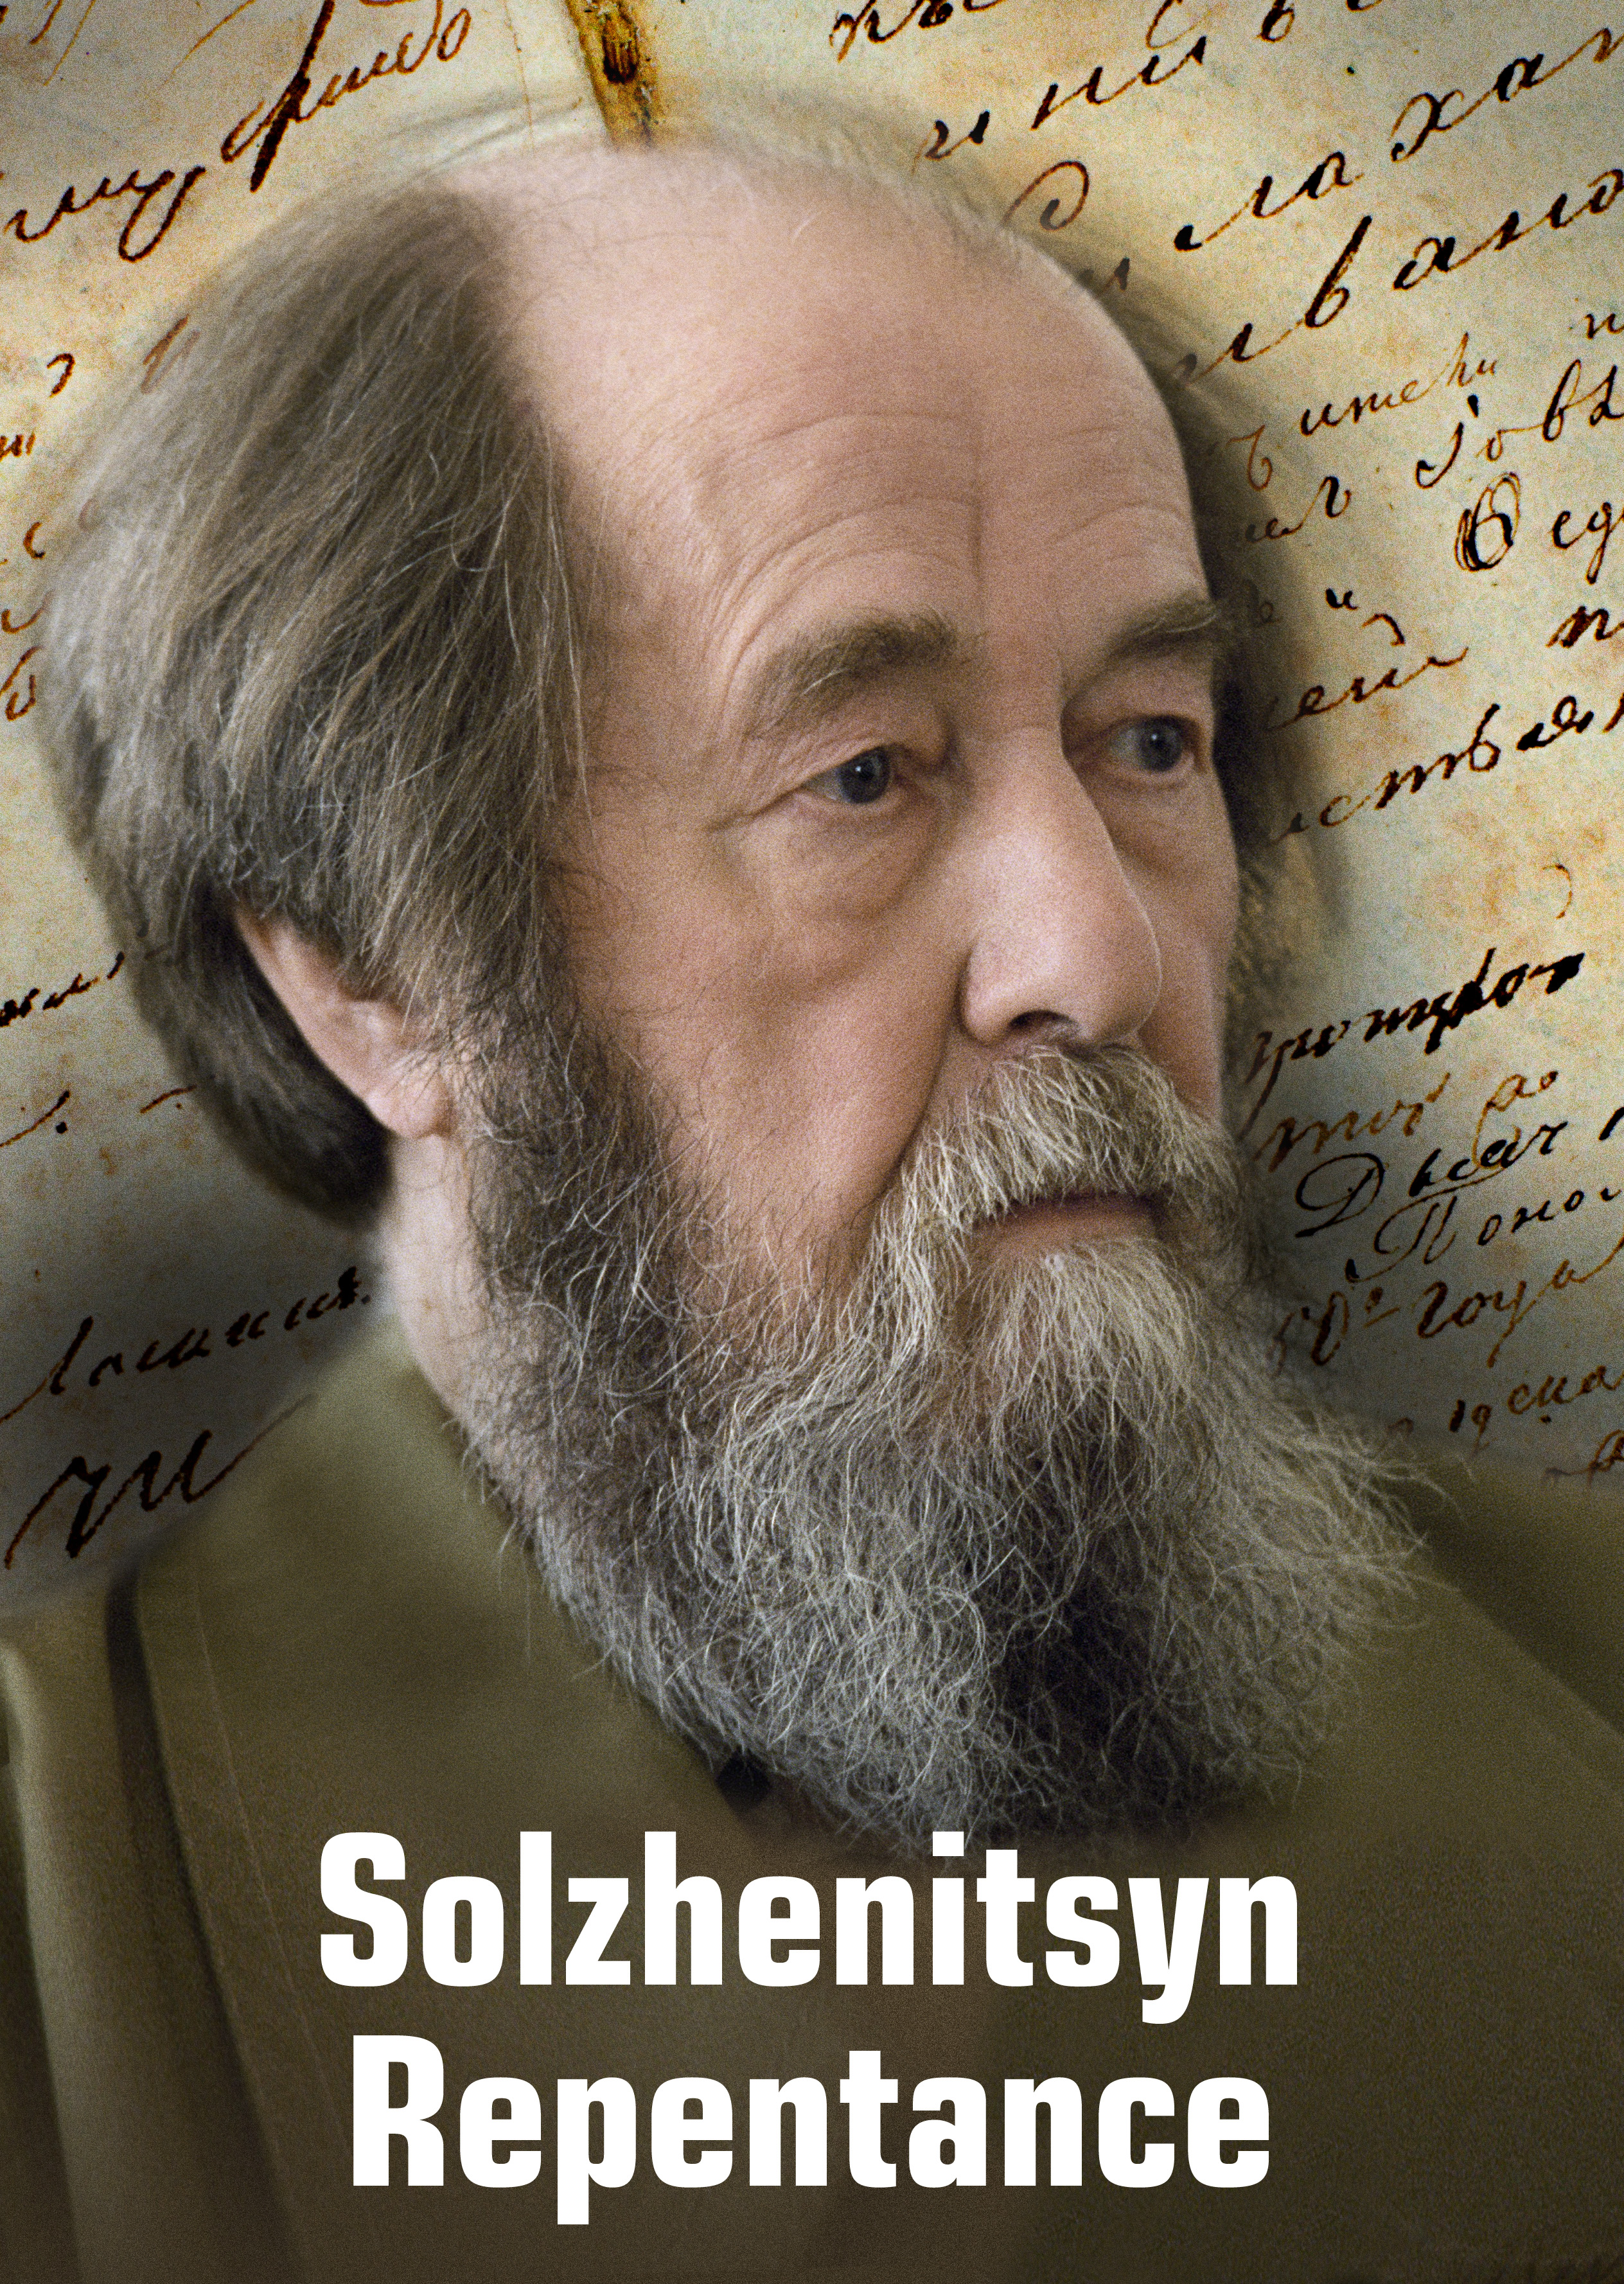 "SOLZHENITSYN: REPENTANCE" TO BE AIRED IN 68 COUNTRIES